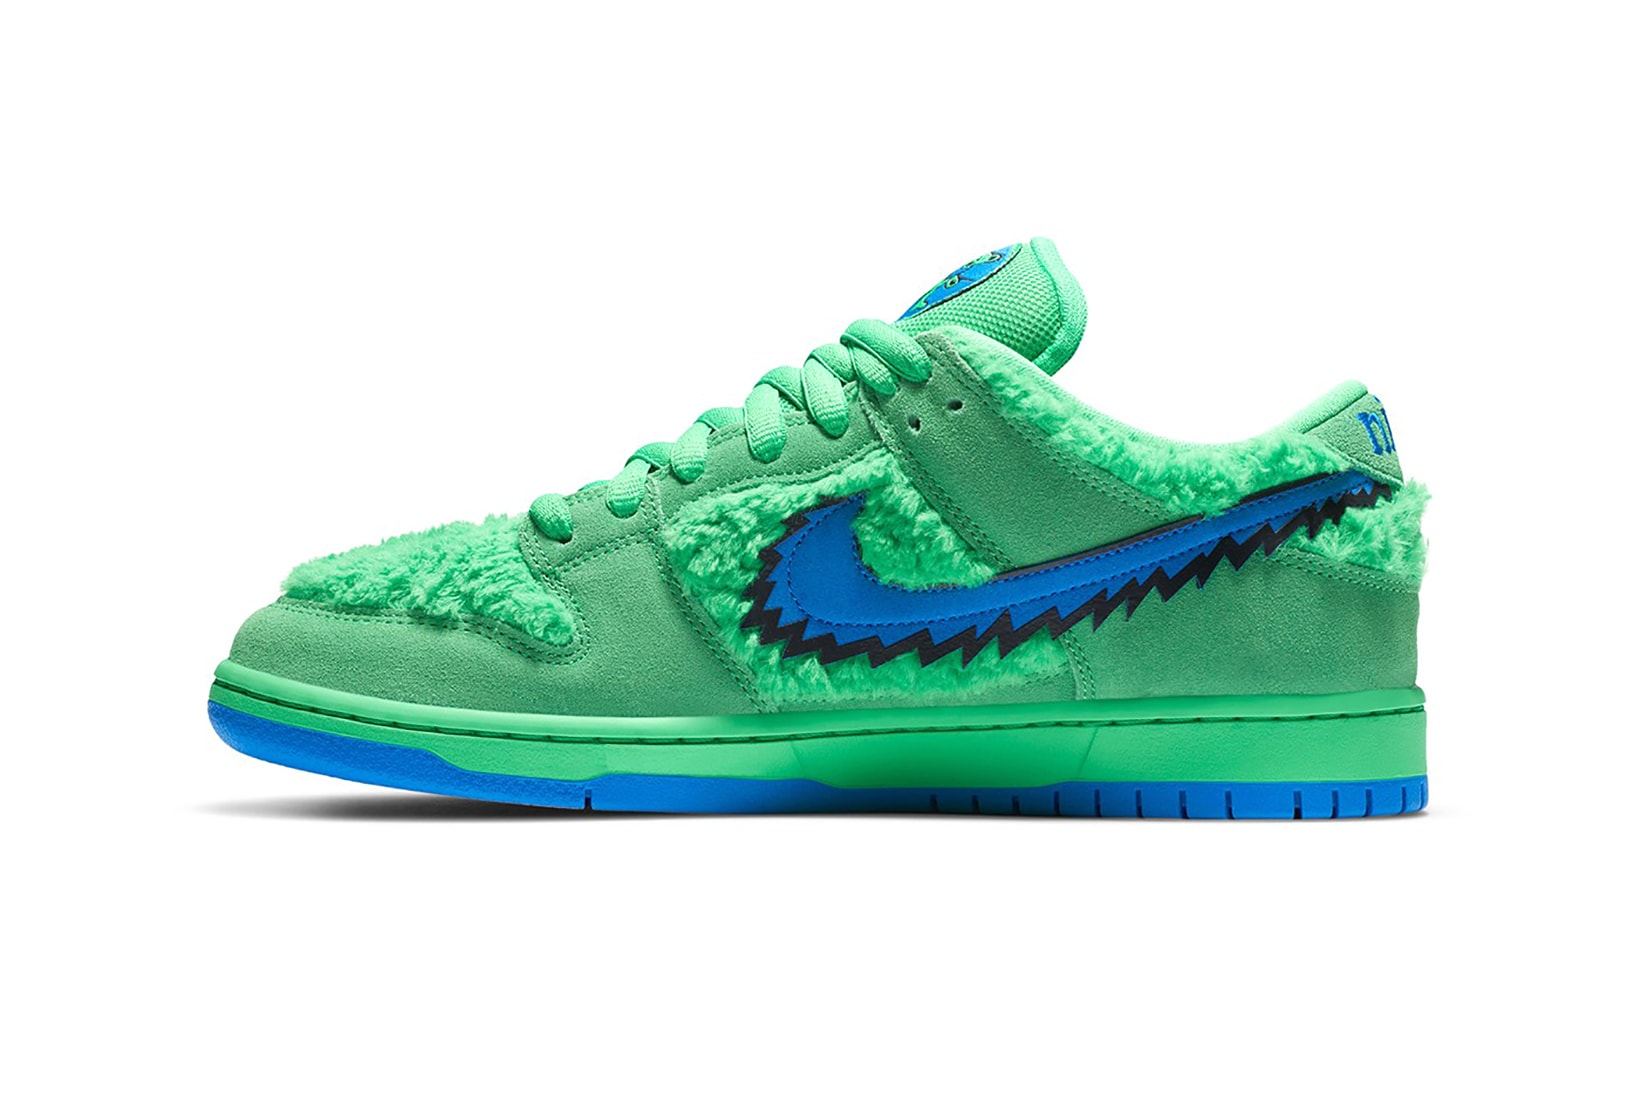 nike grateful dead collaboration sb dunk low sneakers yellow blue green-release-date